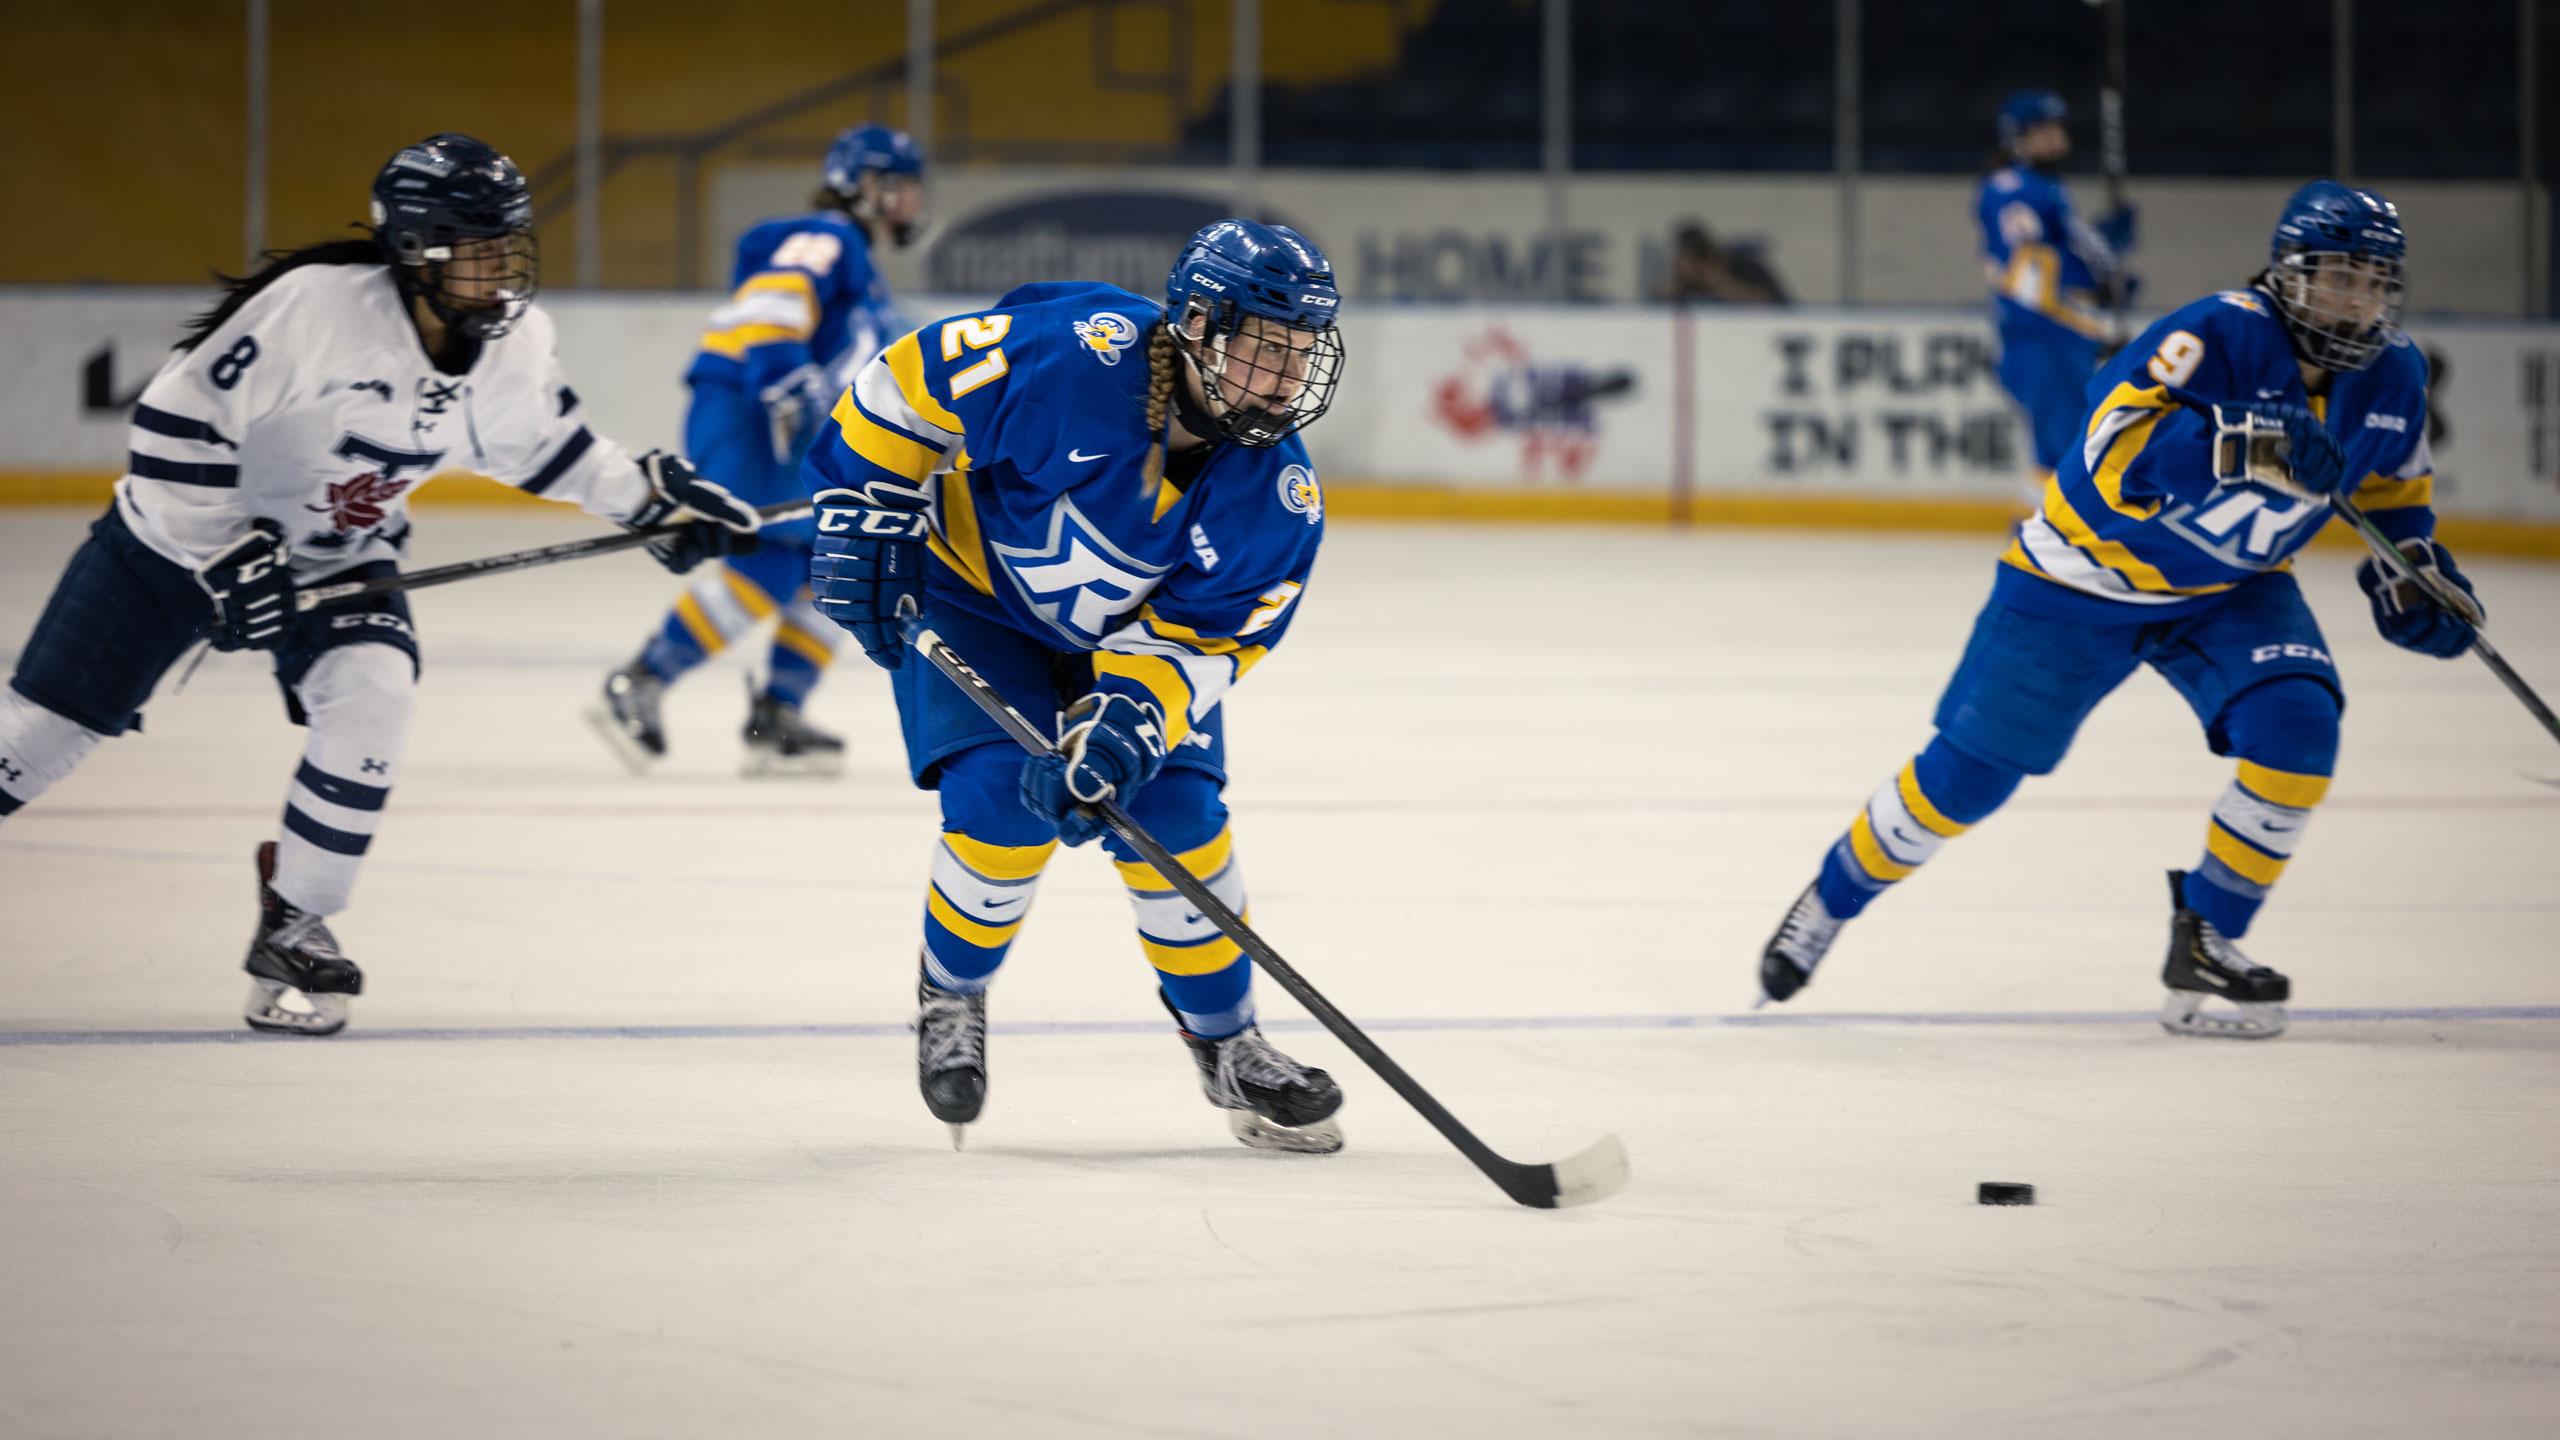 A TMU Bold women's hockey player in a blue jersey skates up the ice with the puck